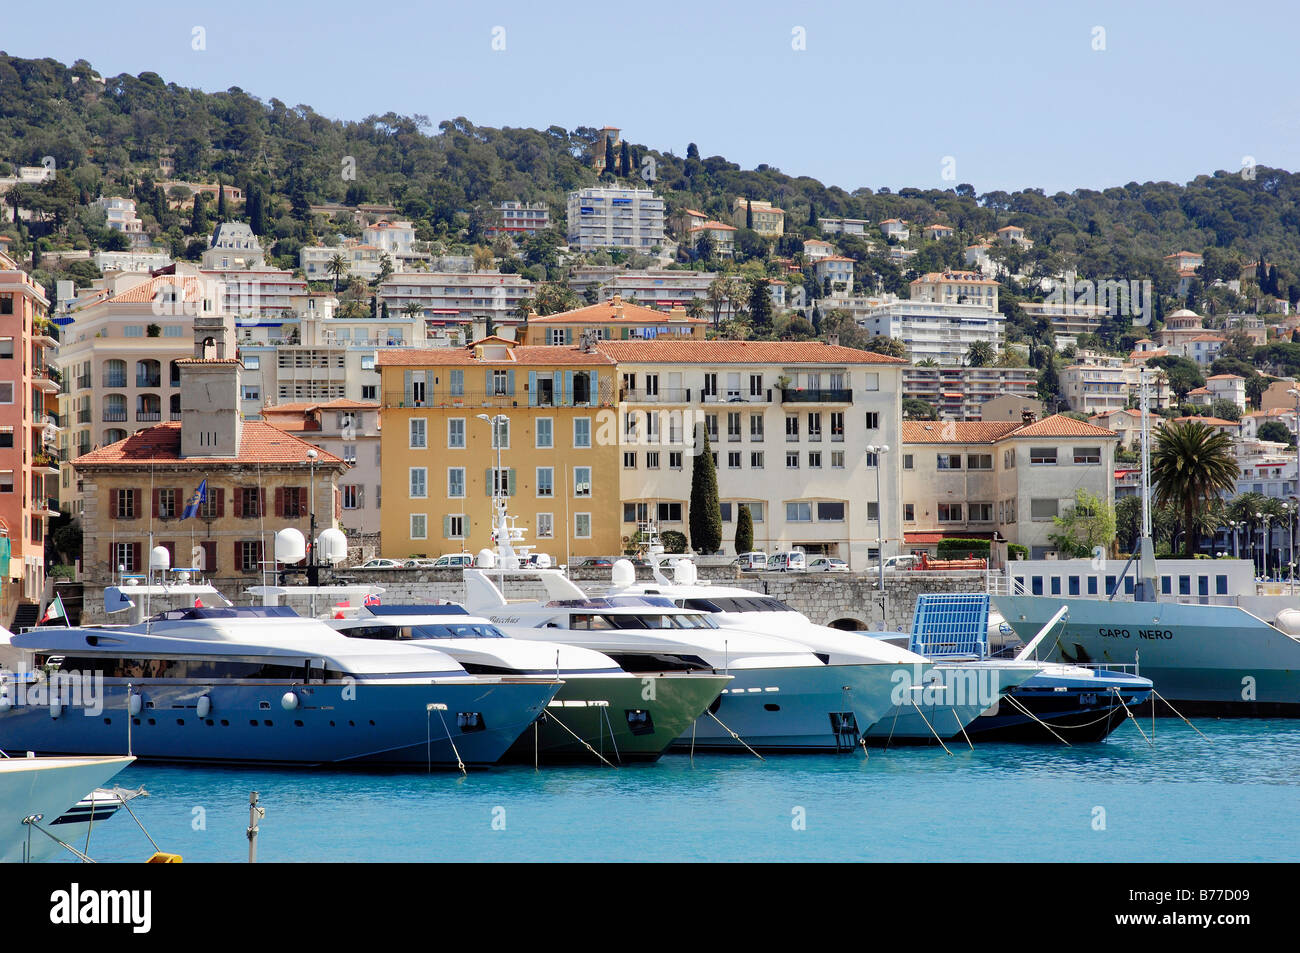 Ships at harbour, Nice, Alpes-Maritimes, Provence-Alpes-Cote d'Azur, Southern France, France, Europe / yacht Stock Photo